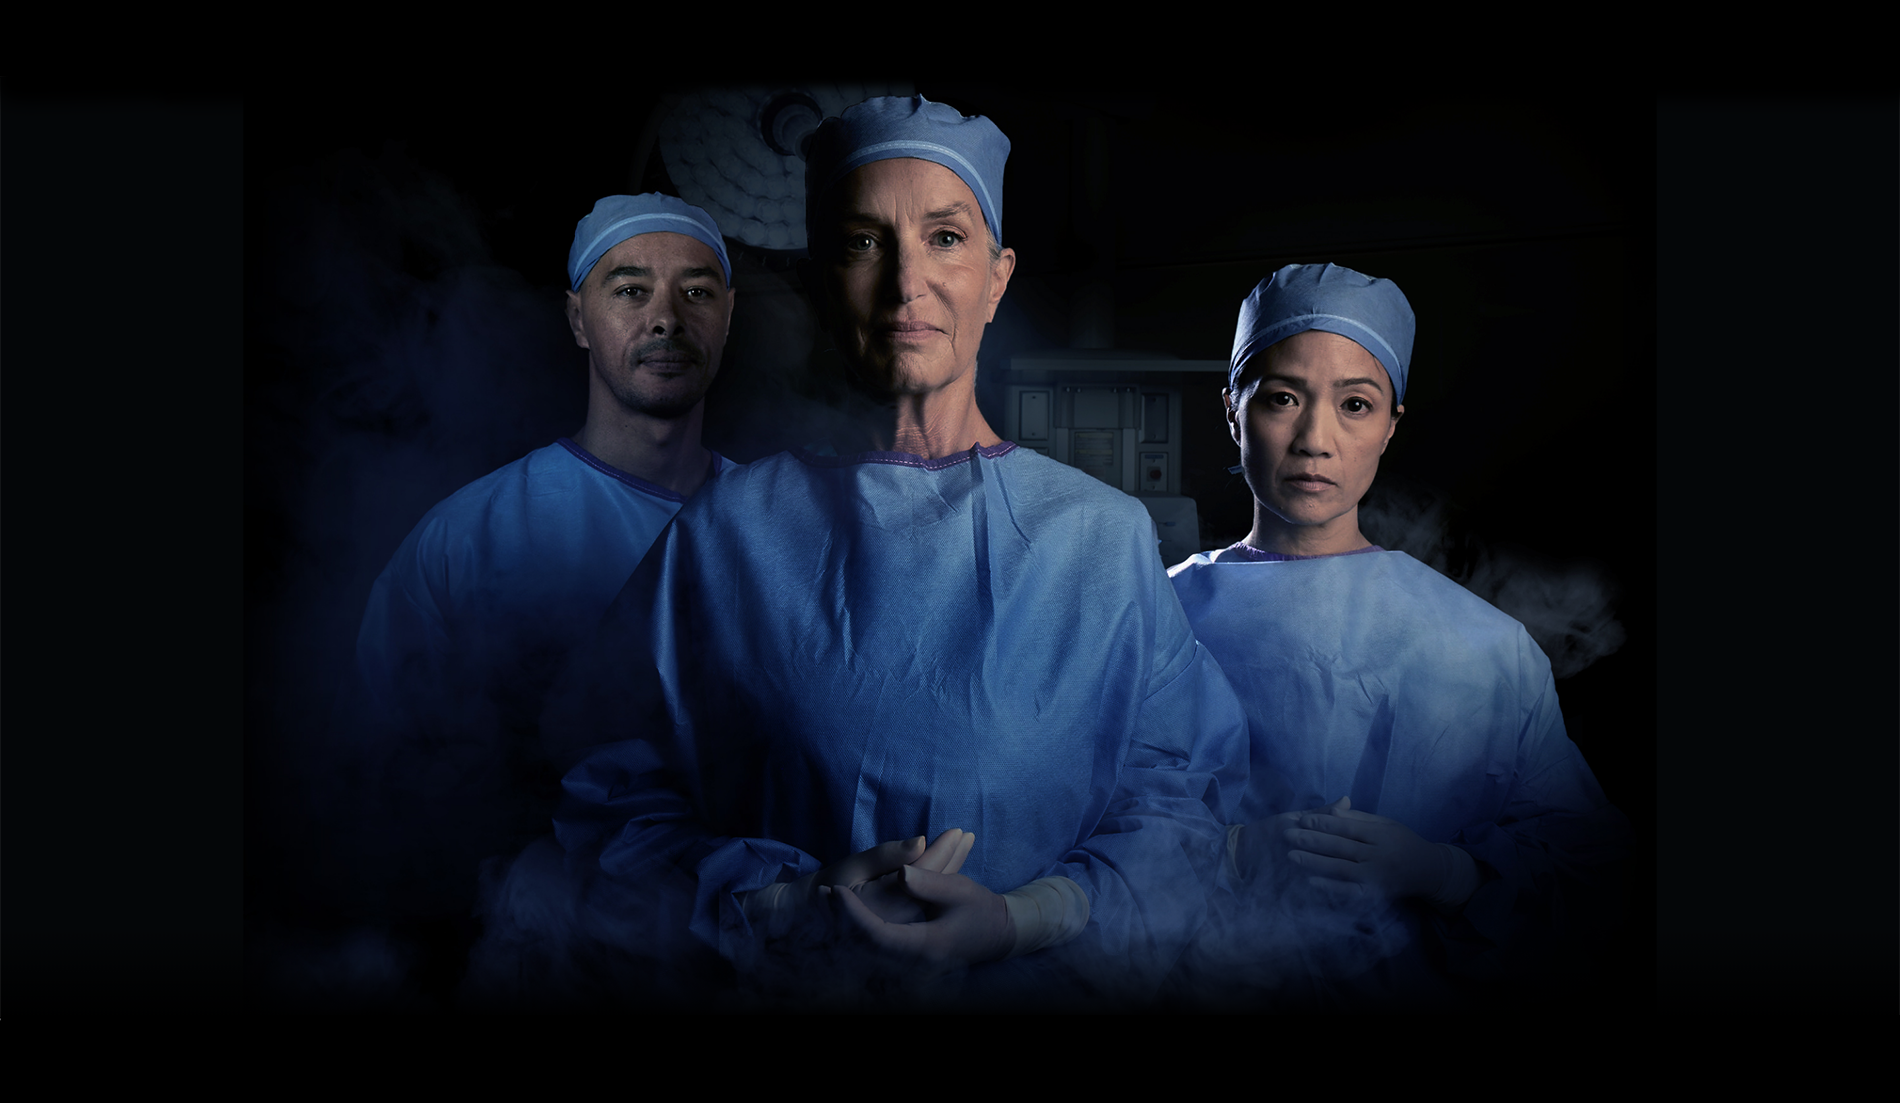 Surgical personnel in a smokey OR setting image